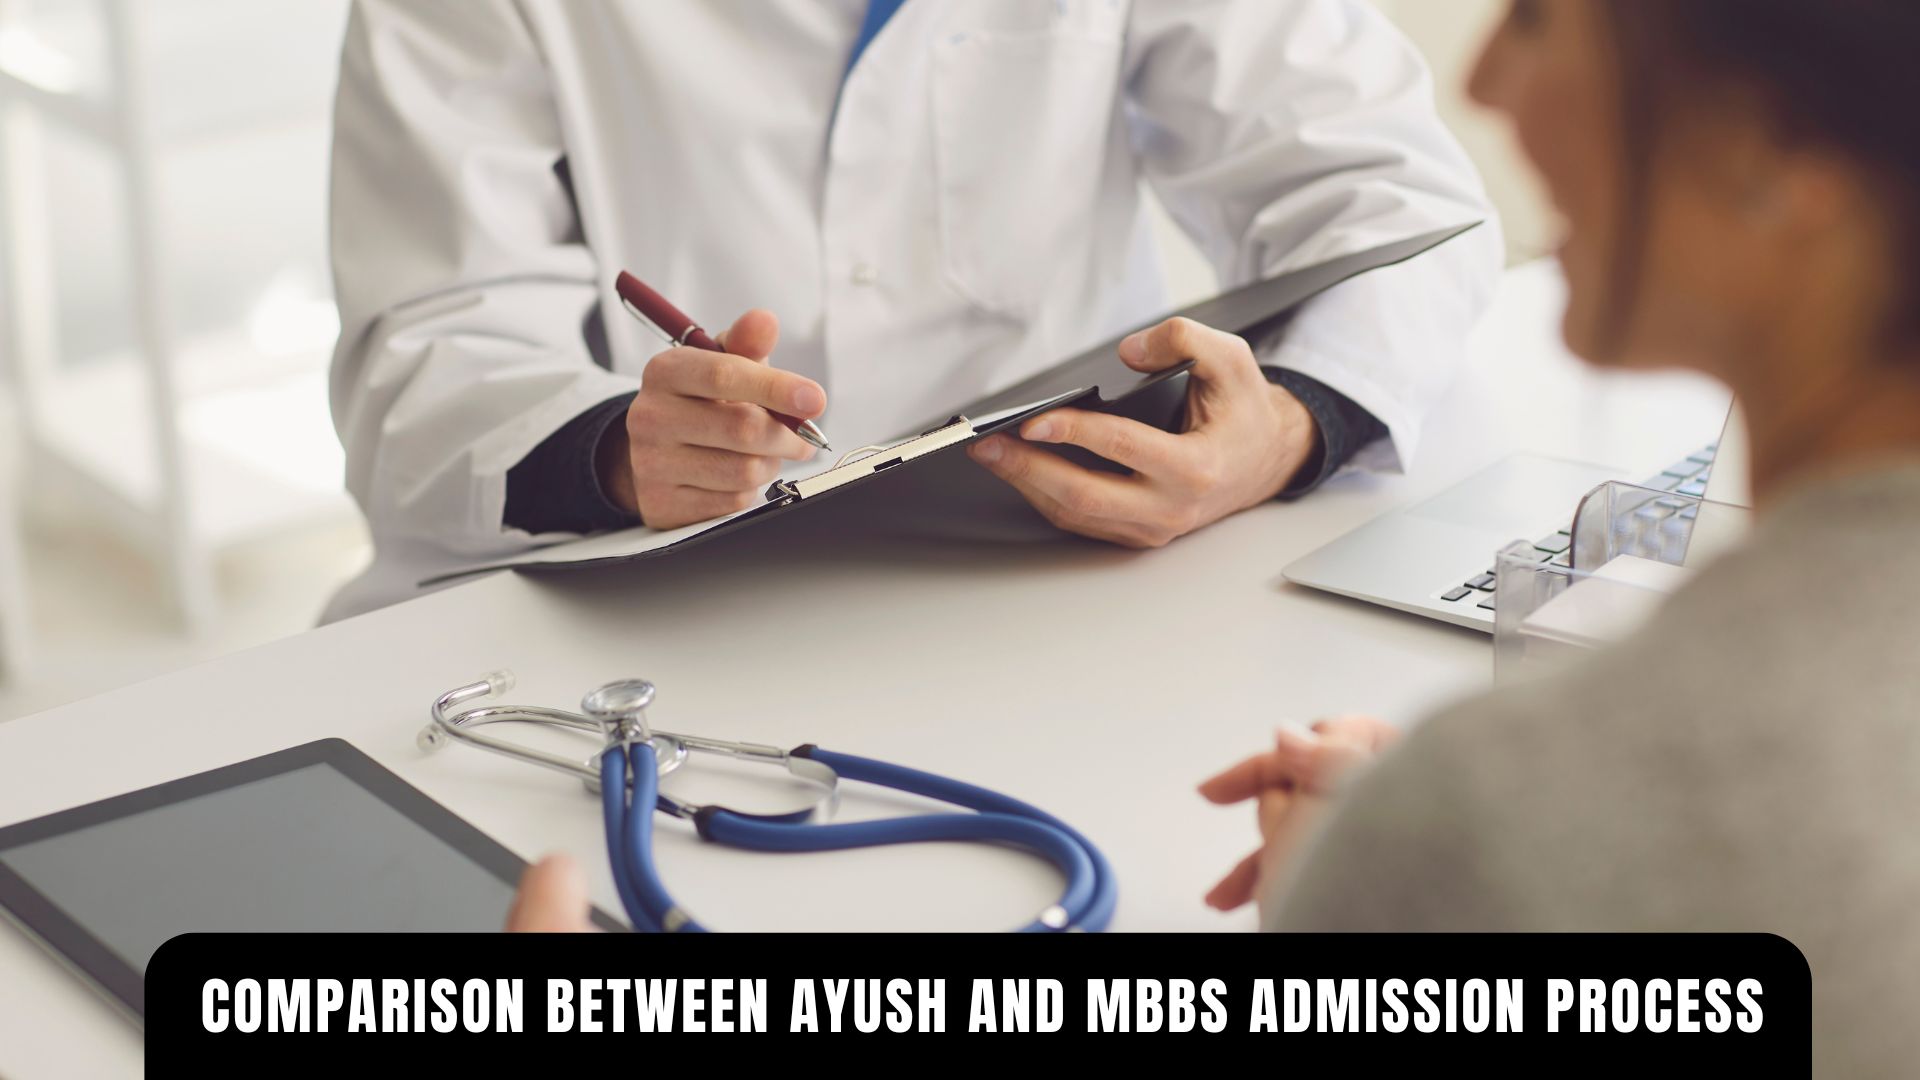 AYUSH AND MBBS ADMISSION PROCESS